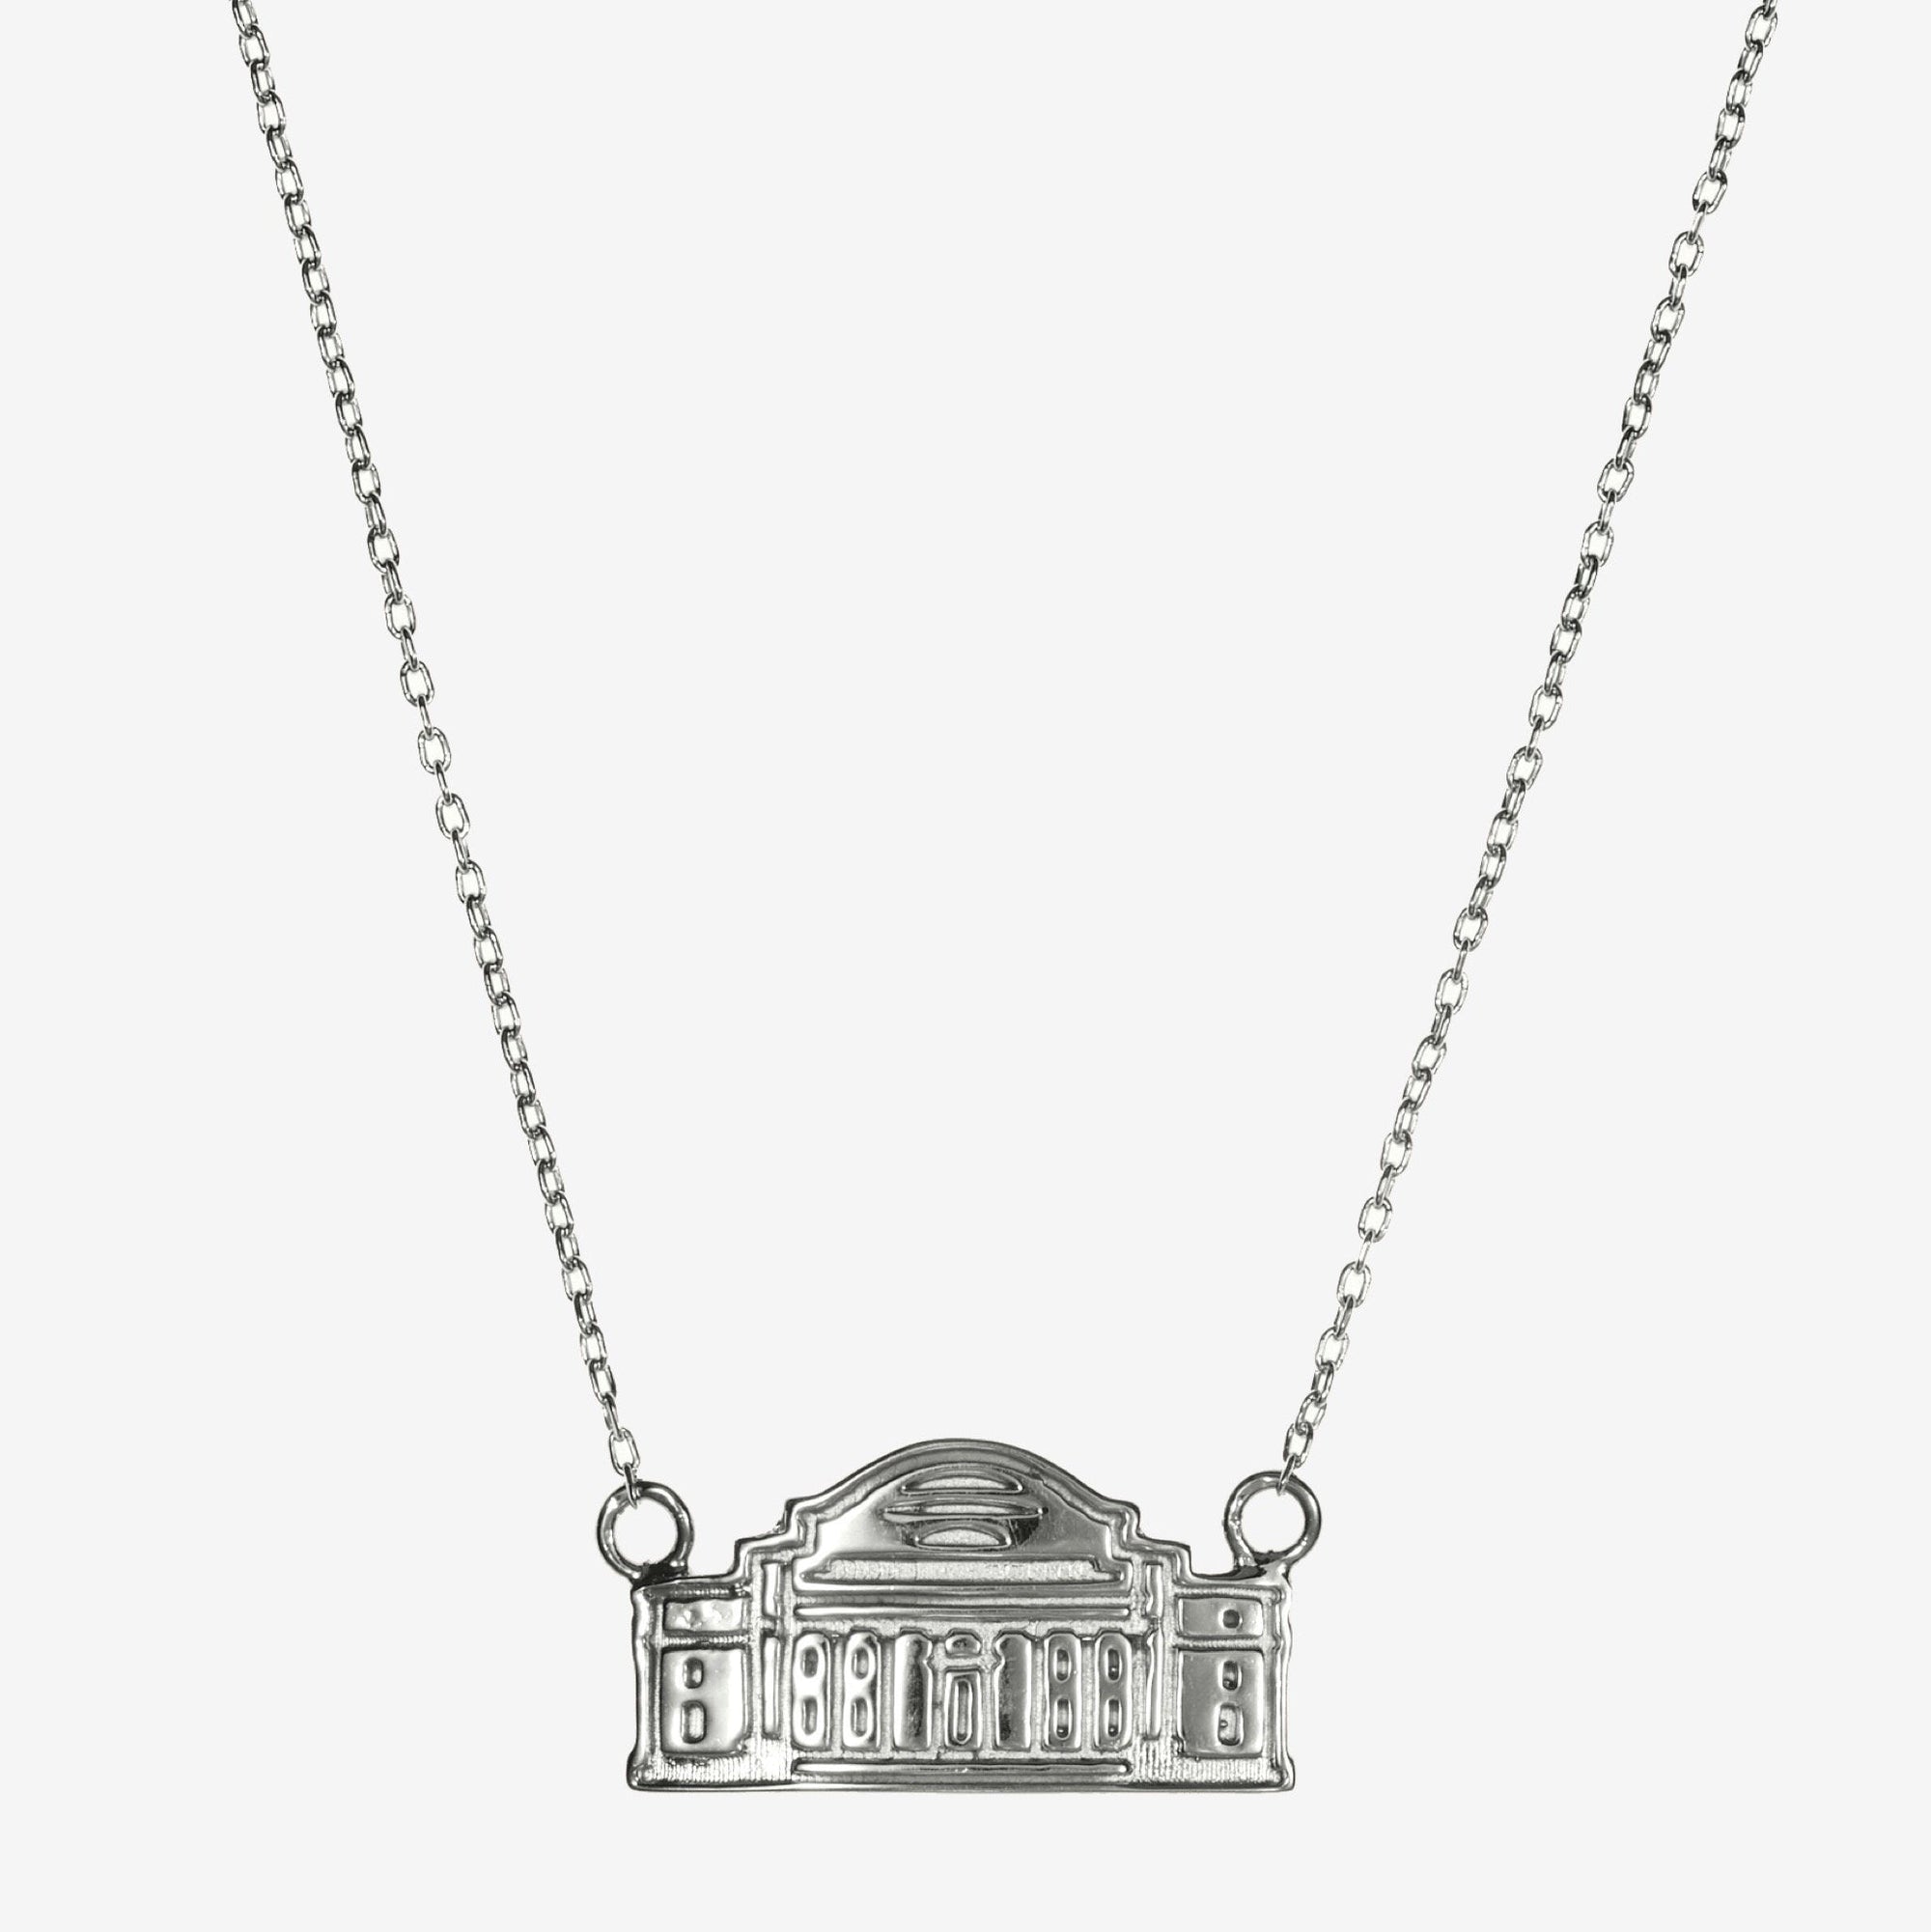 Columbia Low Library Necklace